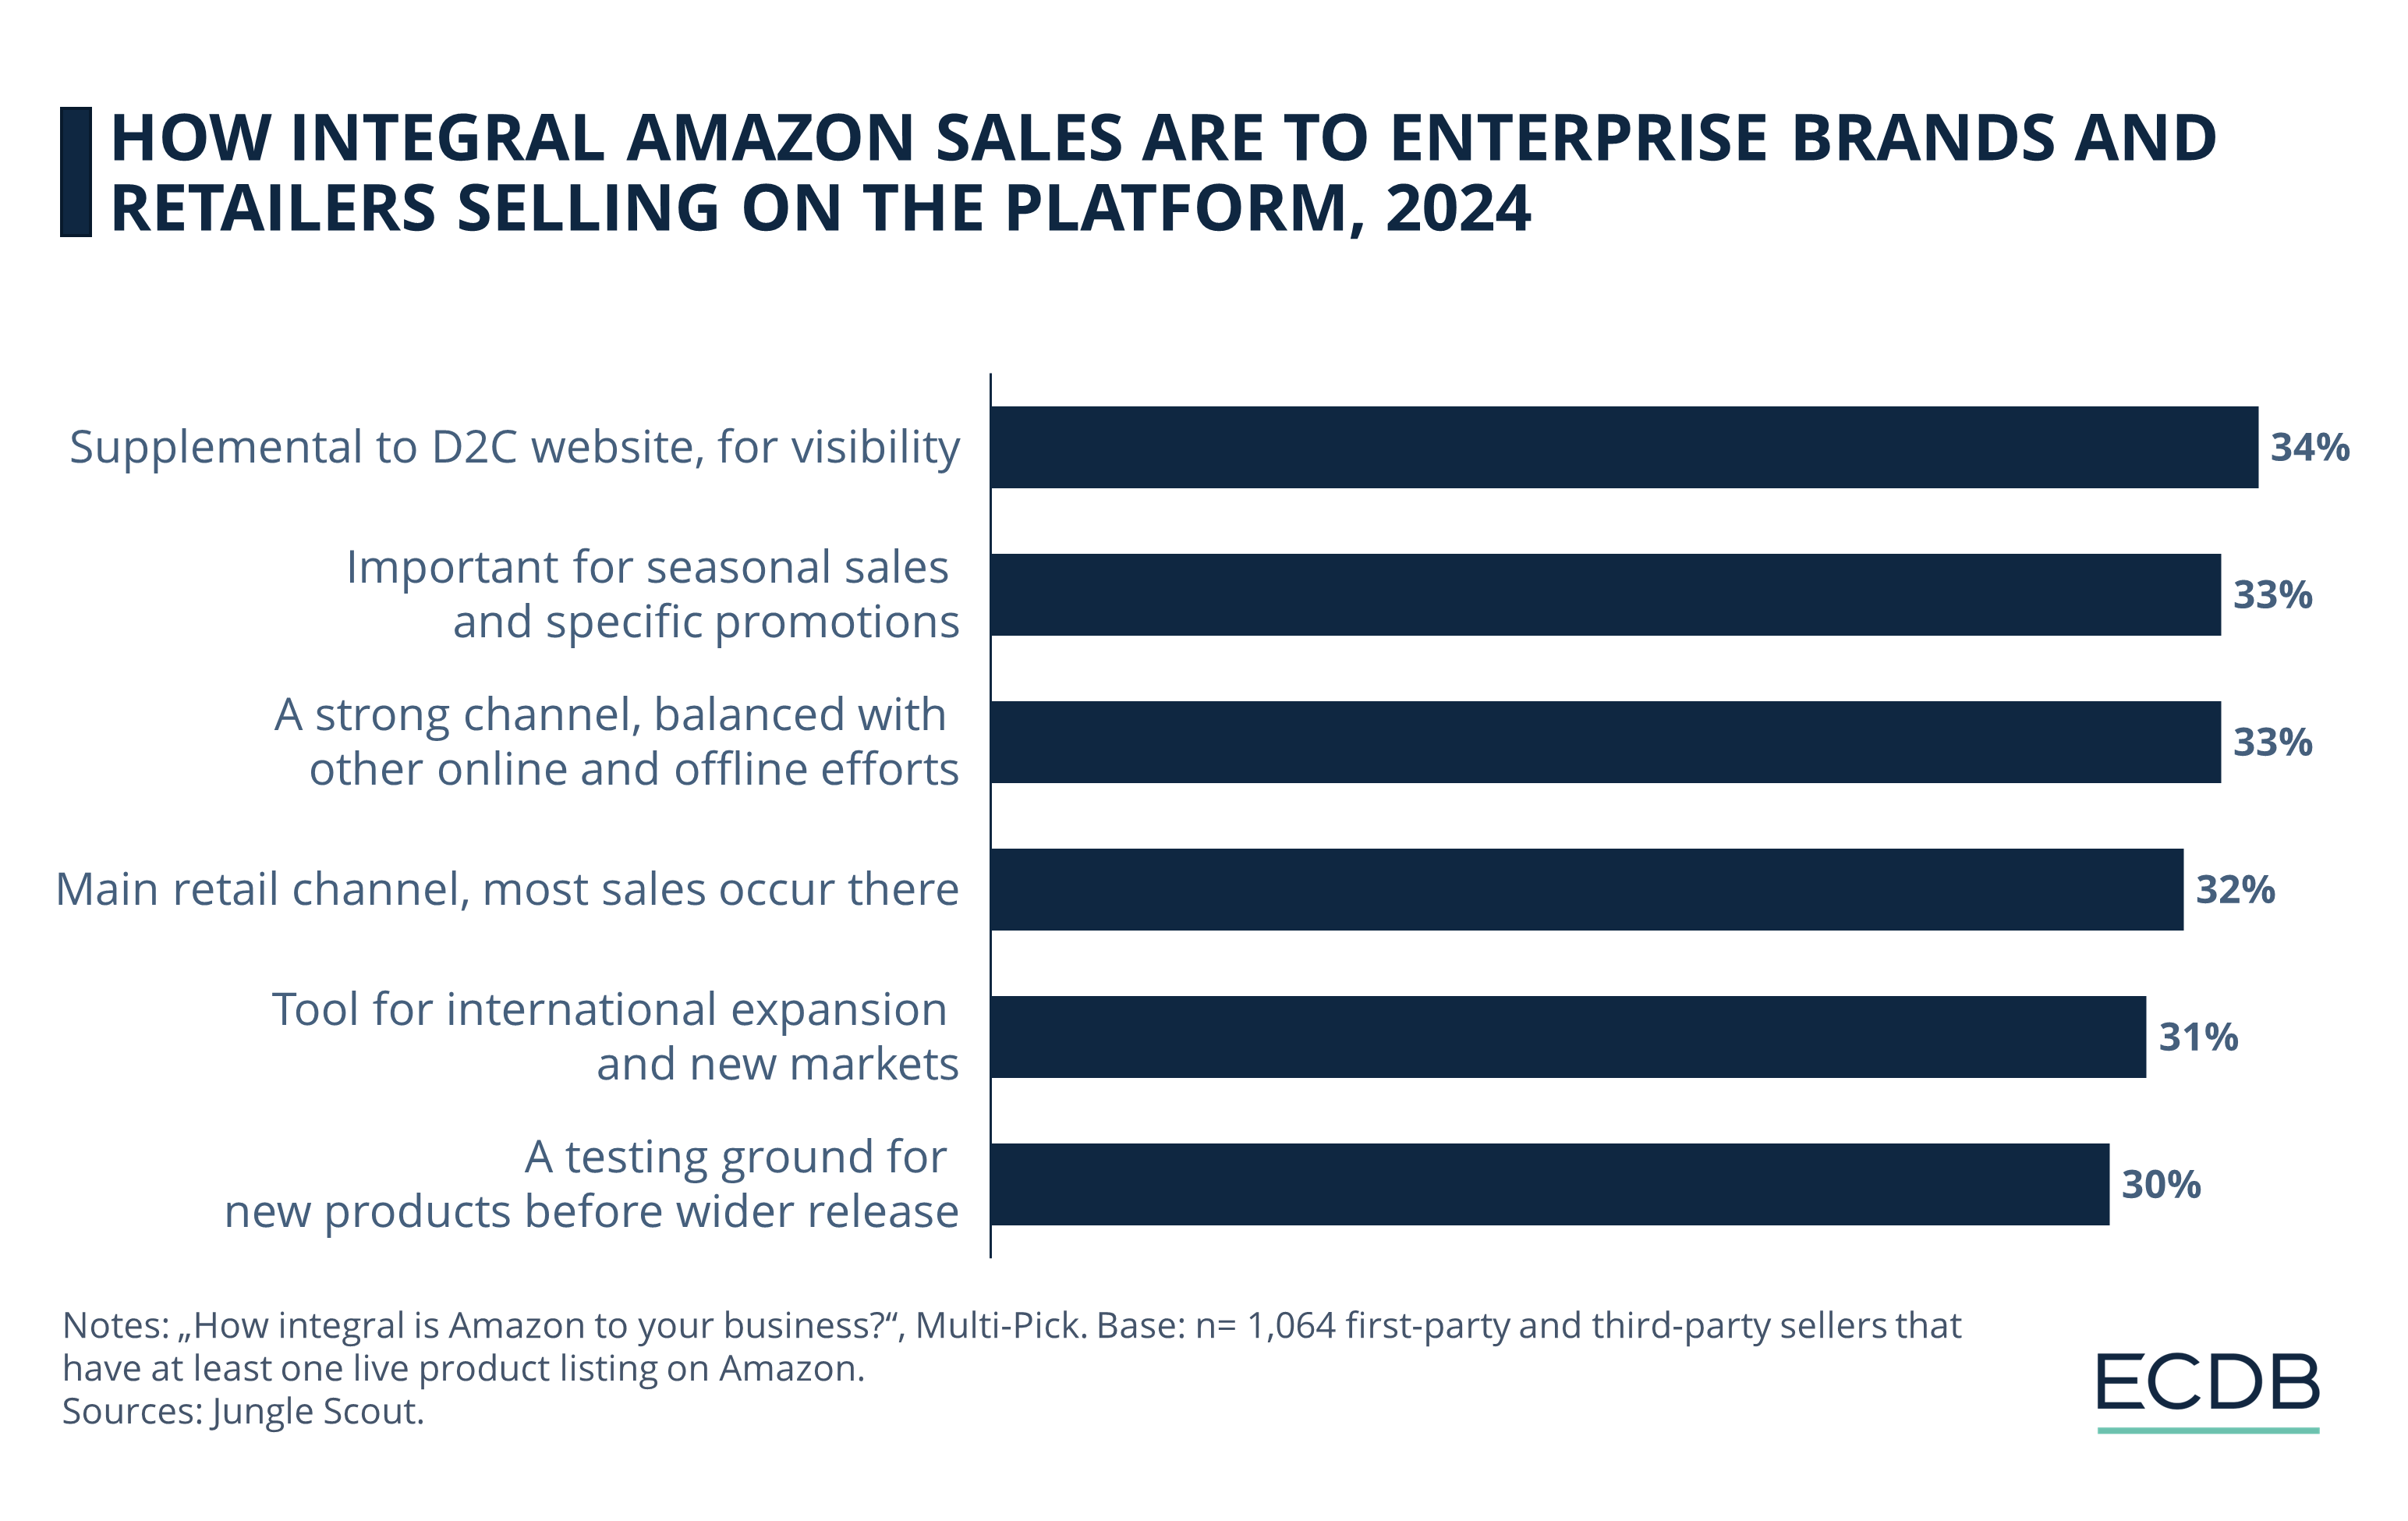 How Integral Amazon Sales Are to Enterprise Brands and Retailers Selling on the Platform, 2024